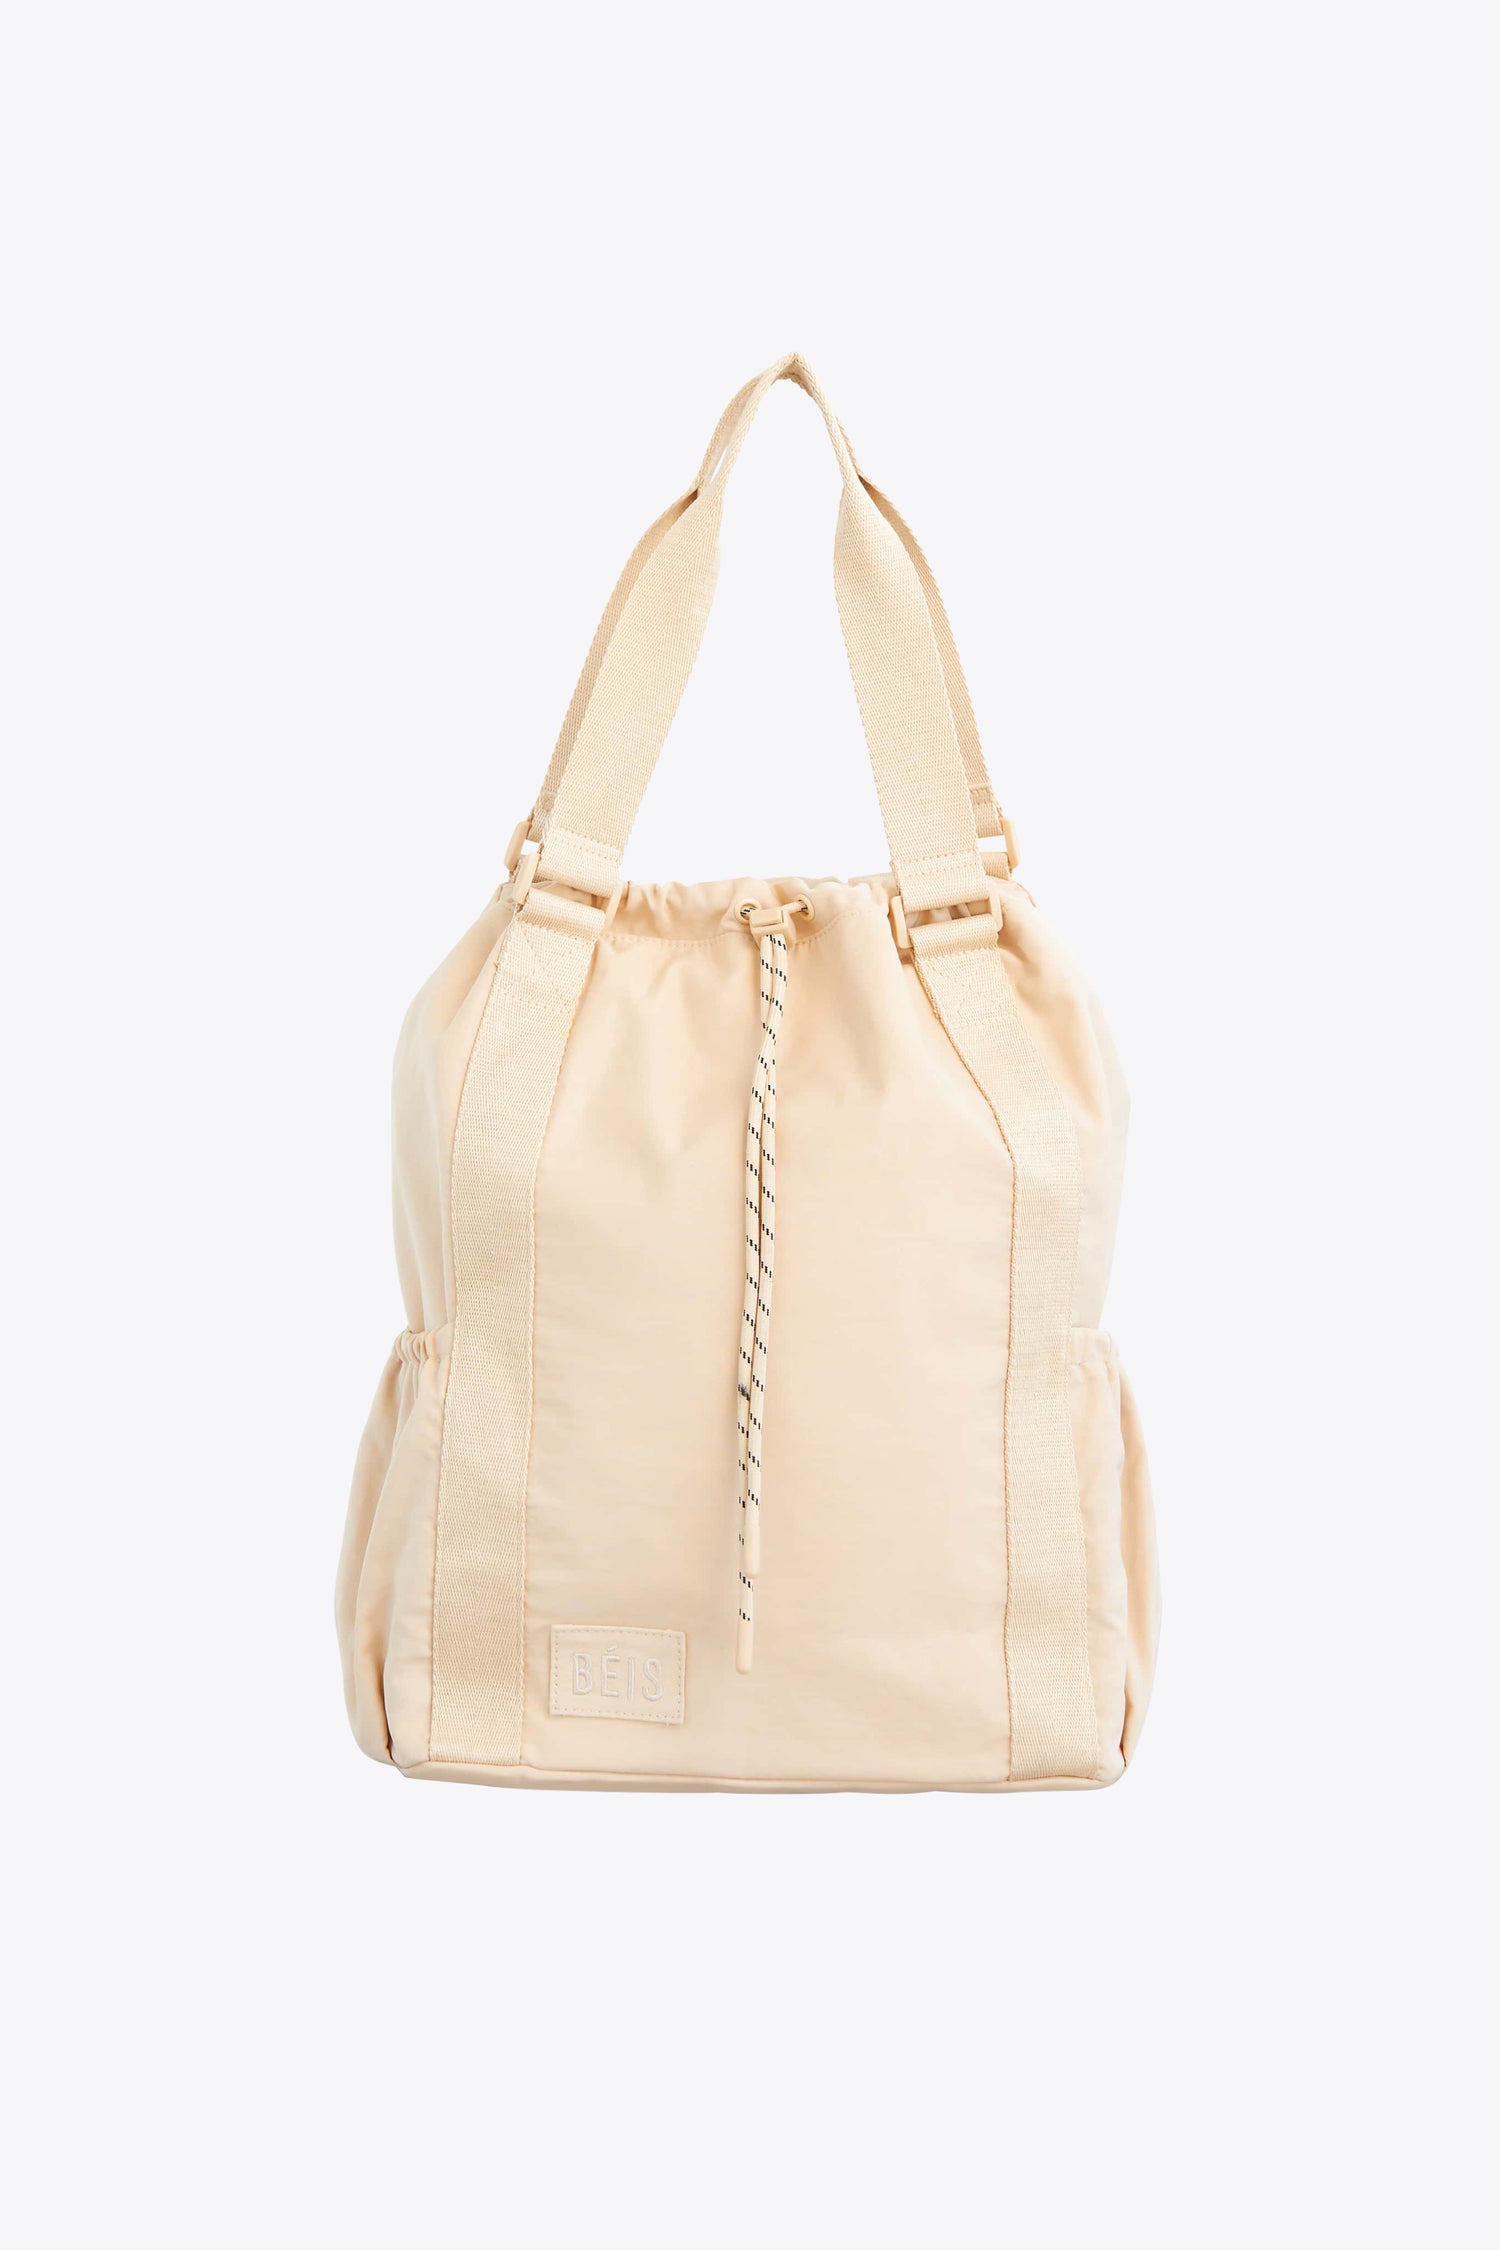 The Sport Tote